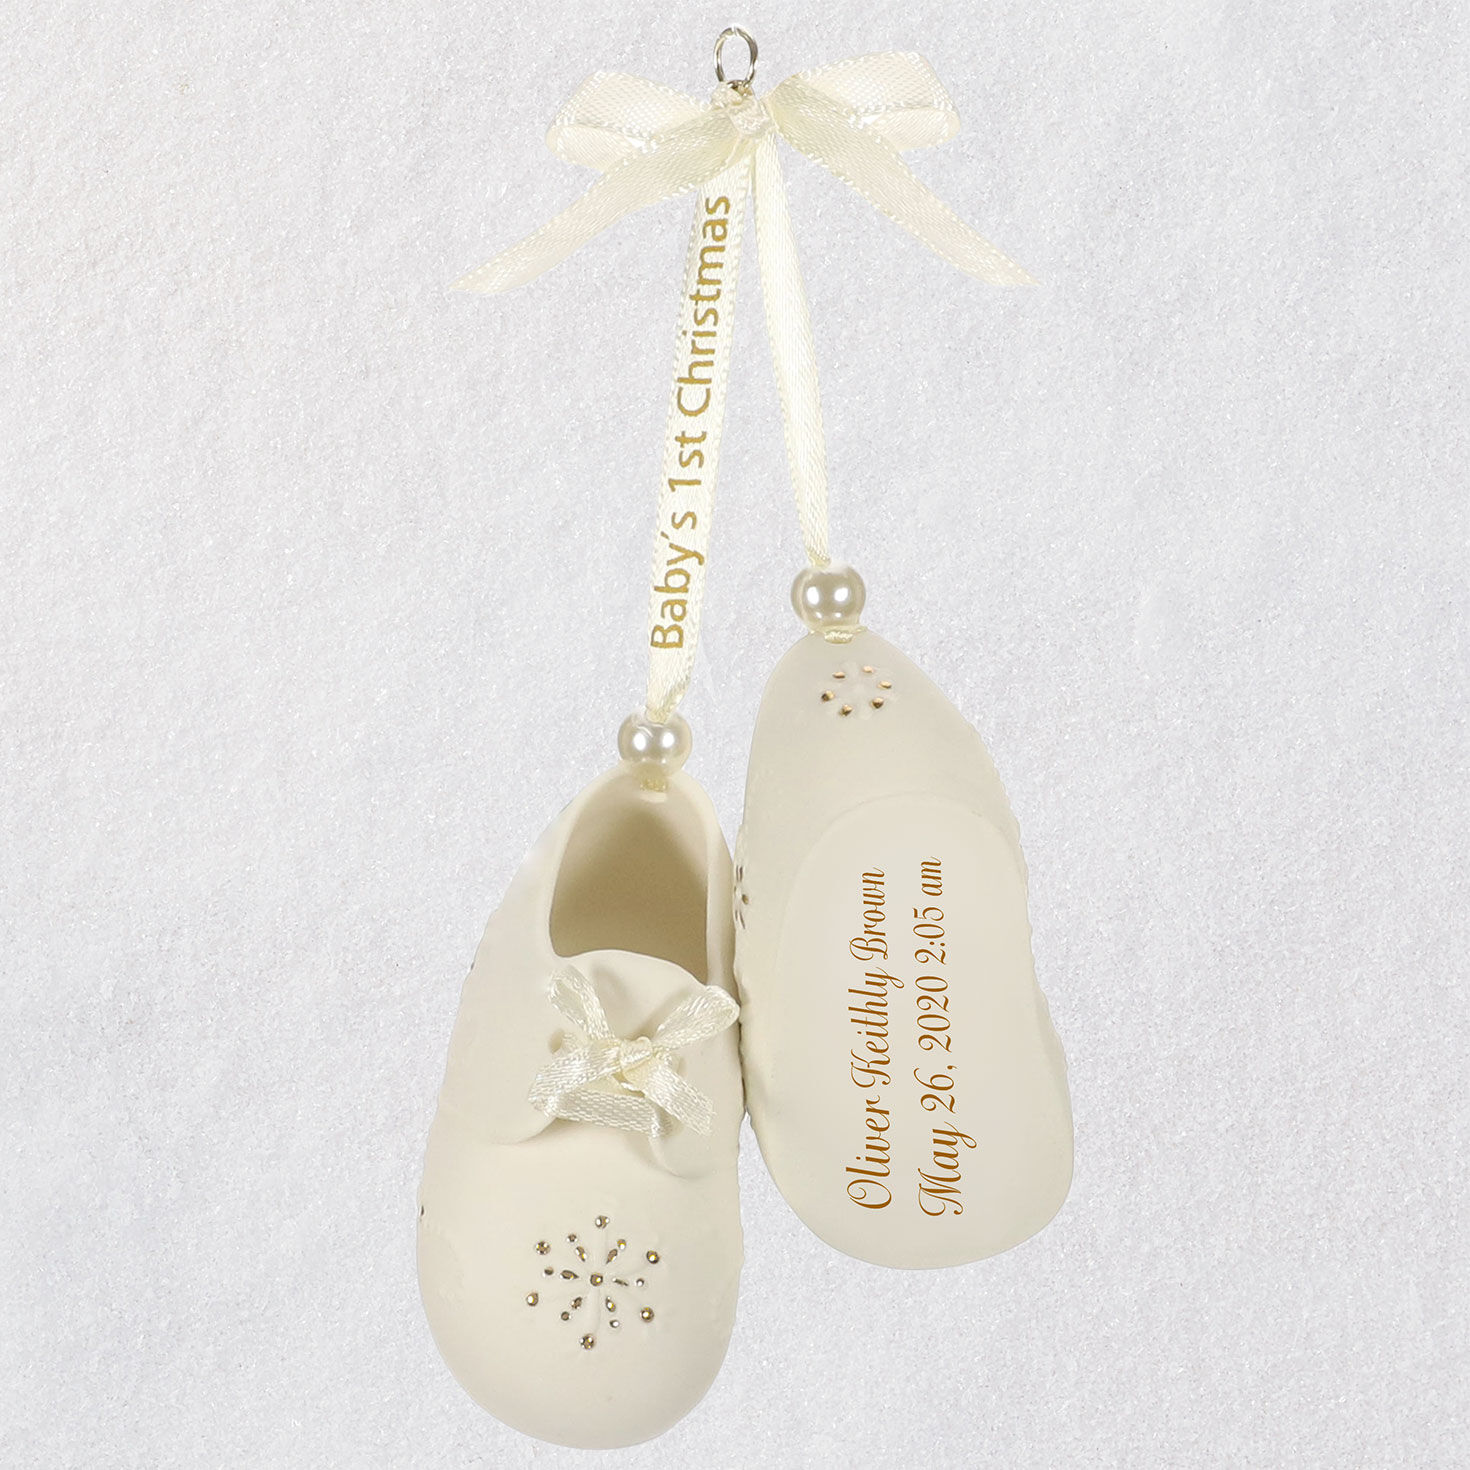 Includes Free Shipping Baby Boys Shoes Ornament /Baby Boy Ornament/ Baby's First Christmas Glass Christmas Ornament